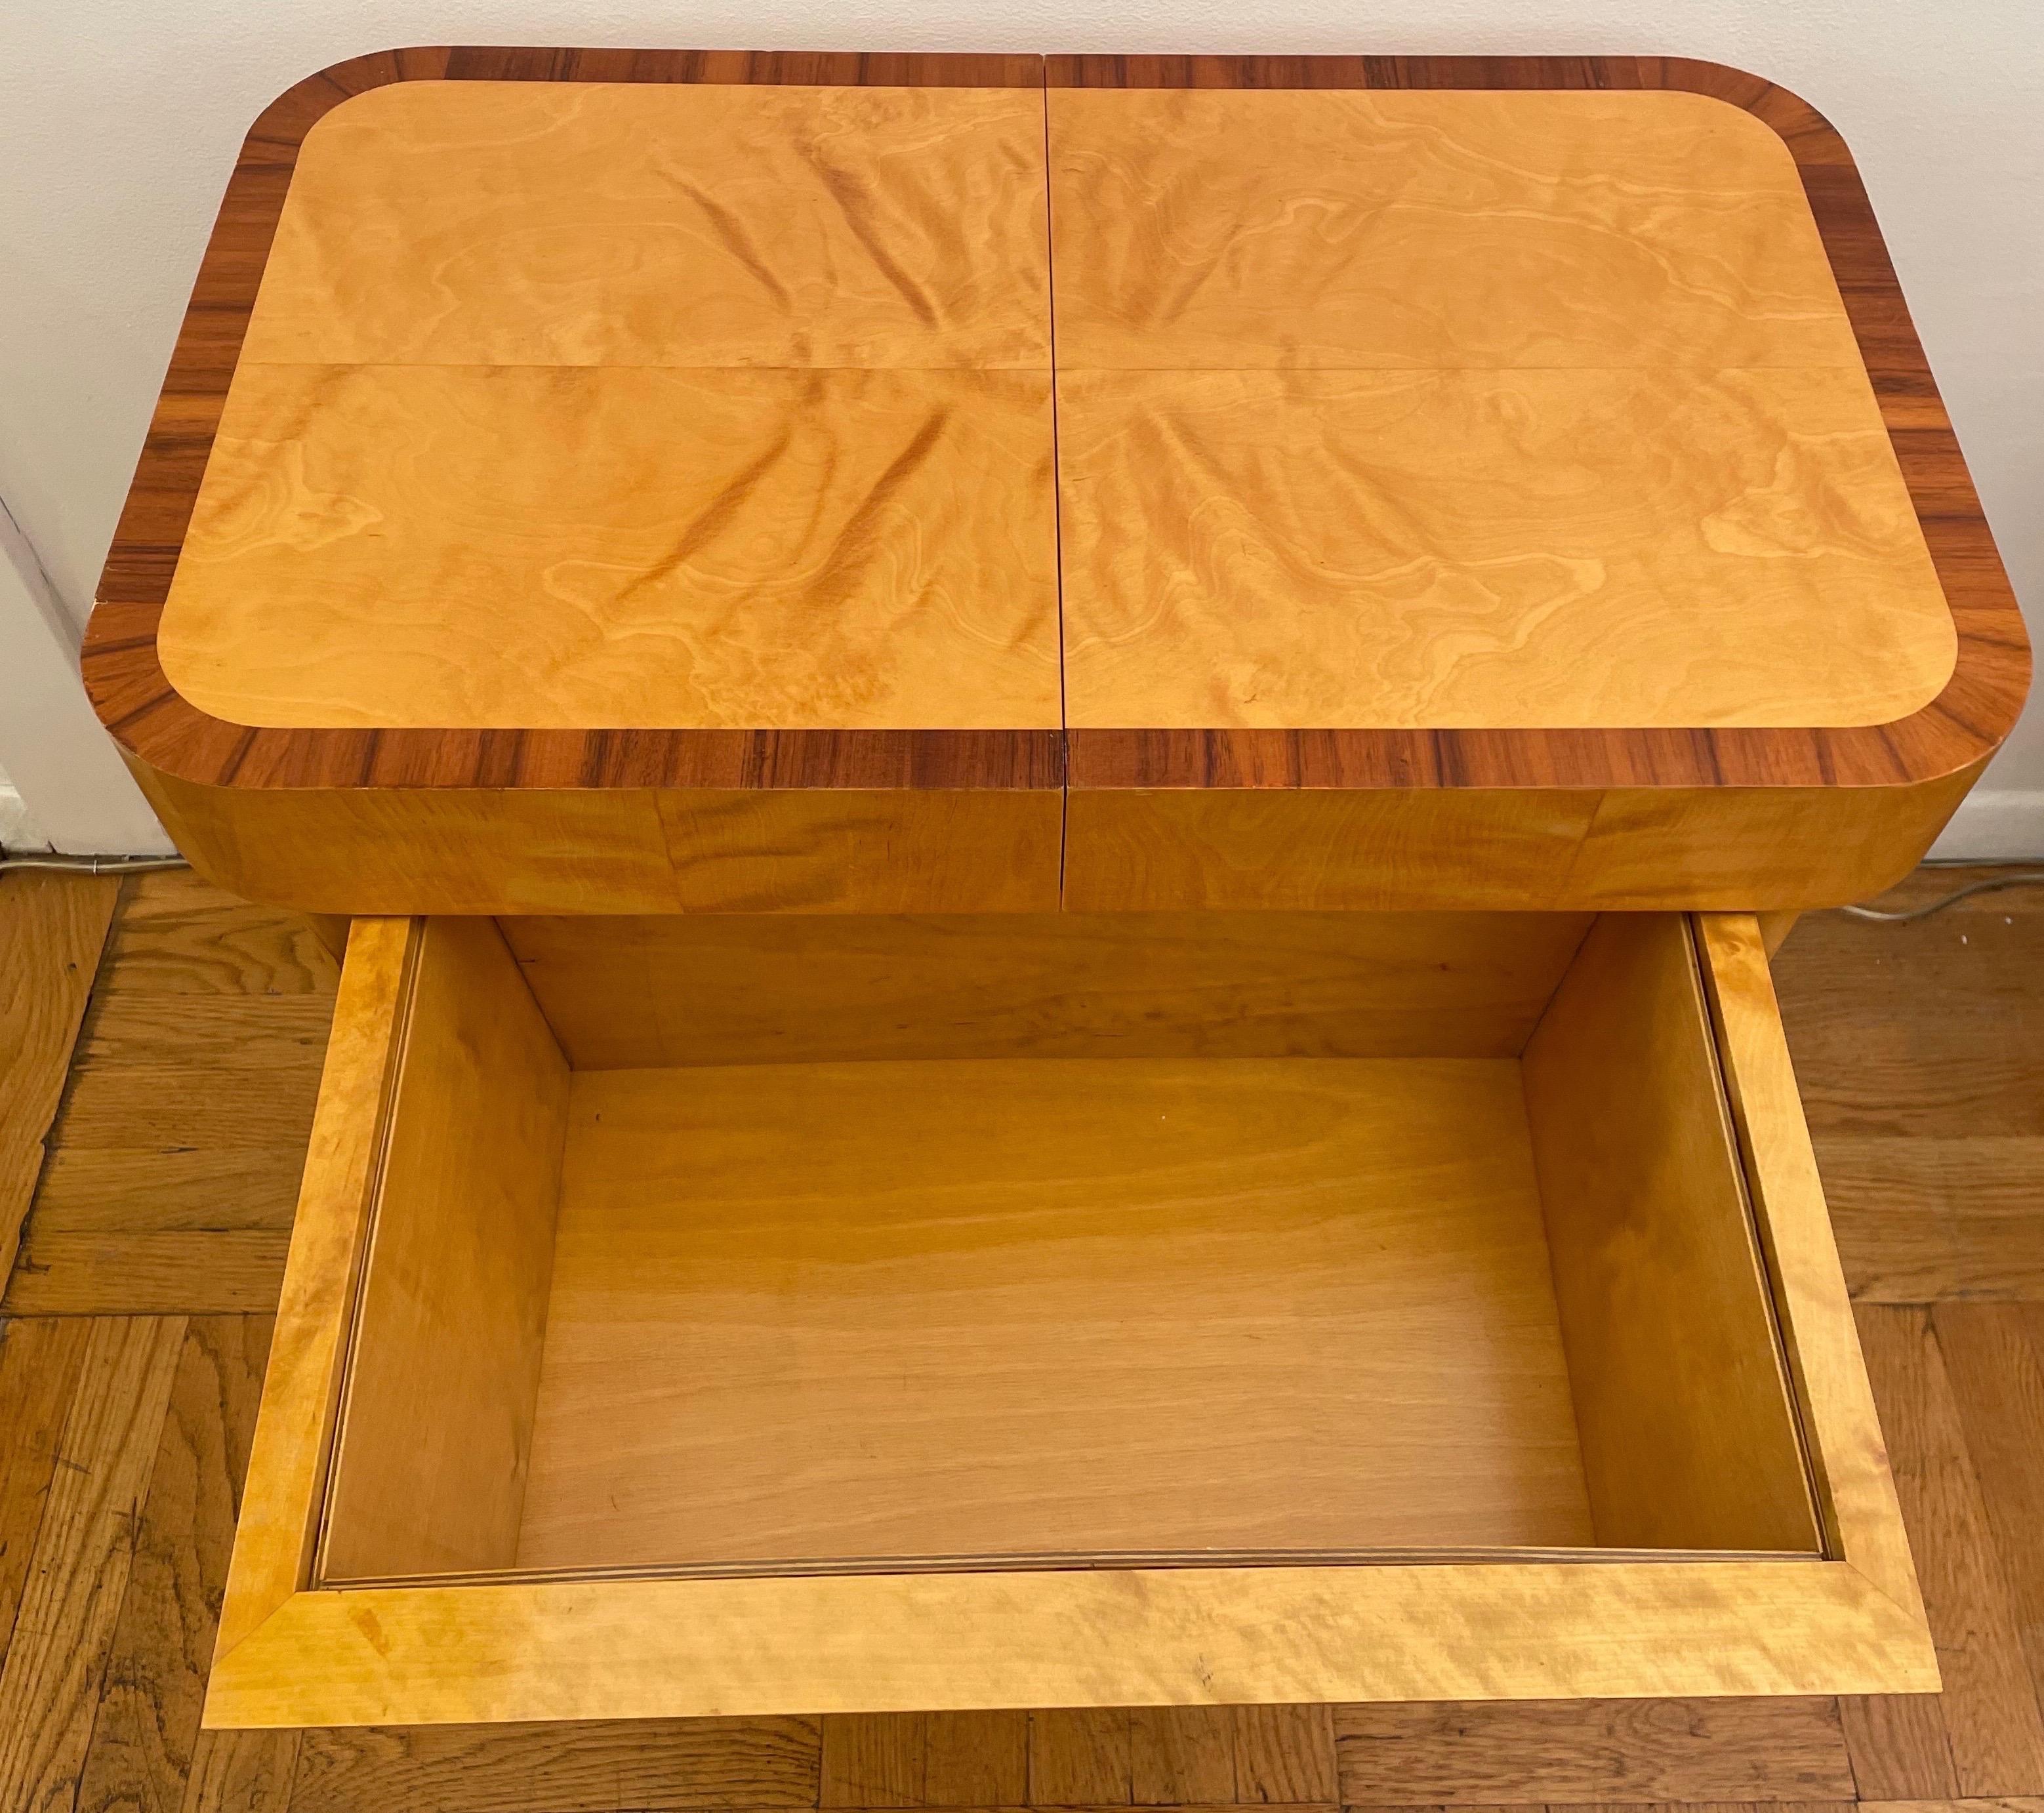 This pair of bodafors tables are made of solid swedish birch and inlayed simple mahogany details. Discreet basket style storage is hidden underneath masked by decorative bars. Additional secret compartments in the center-opening table top.